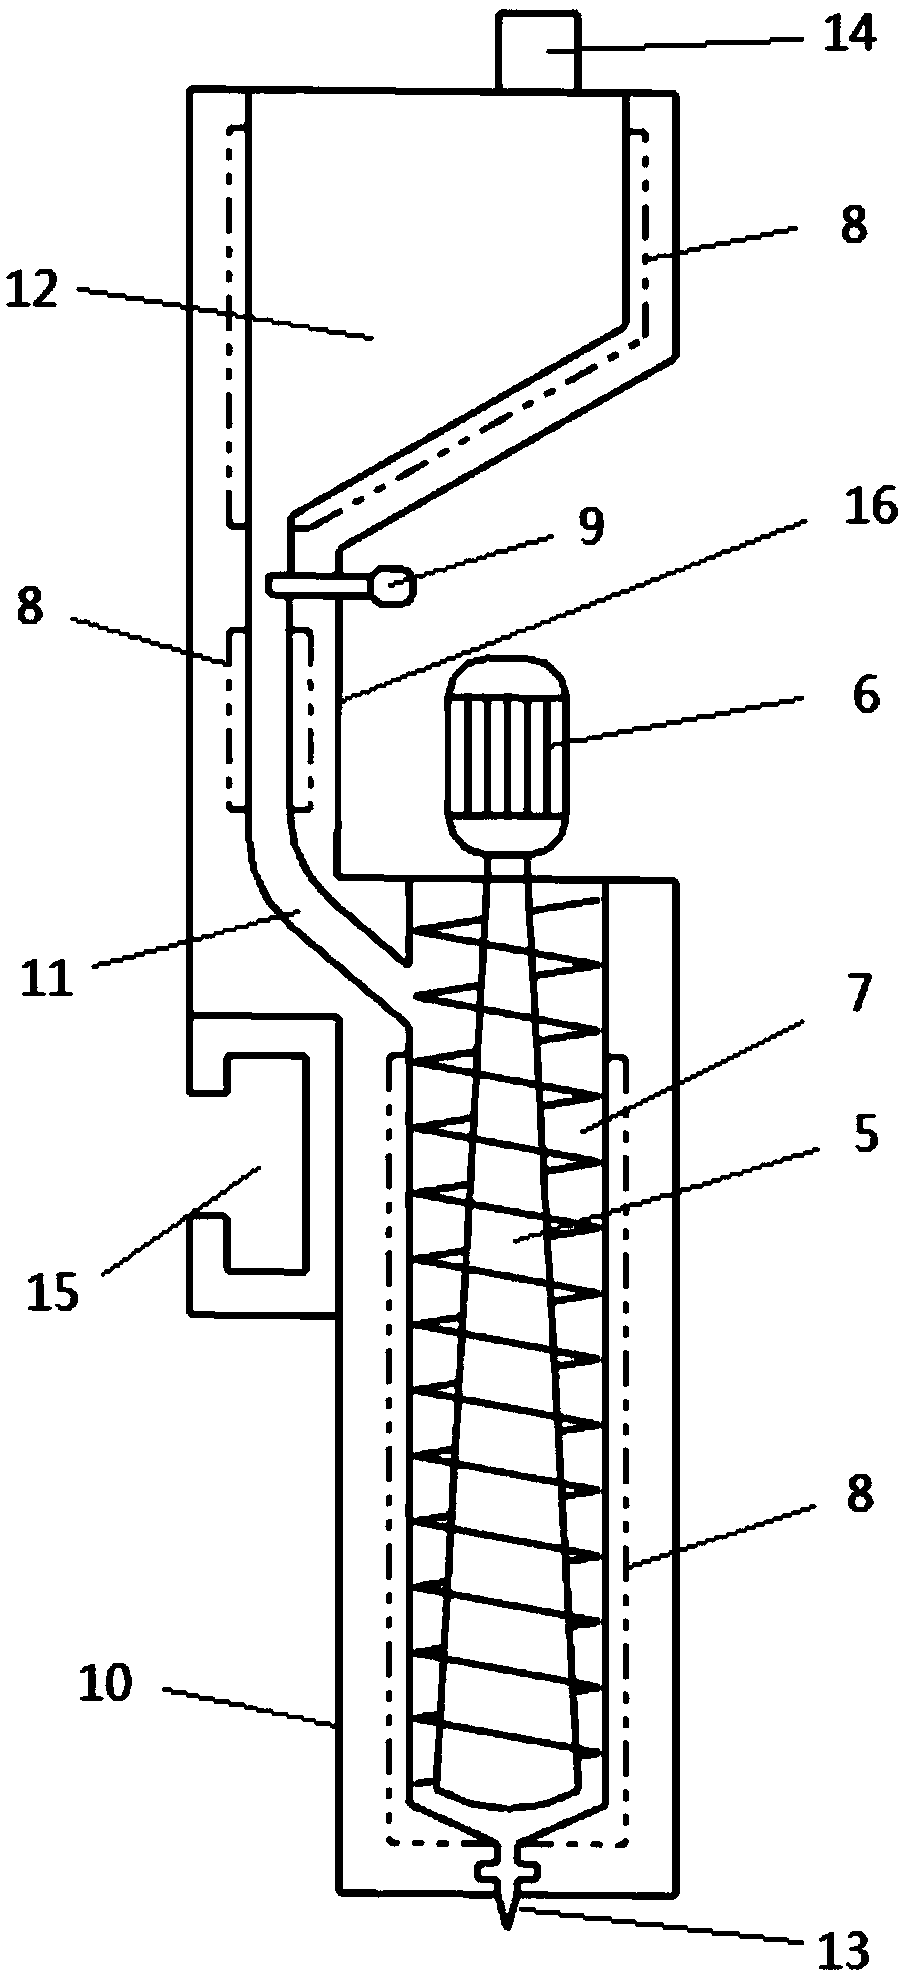 Flexible three-dimensional forming printing device based on screw extrusion